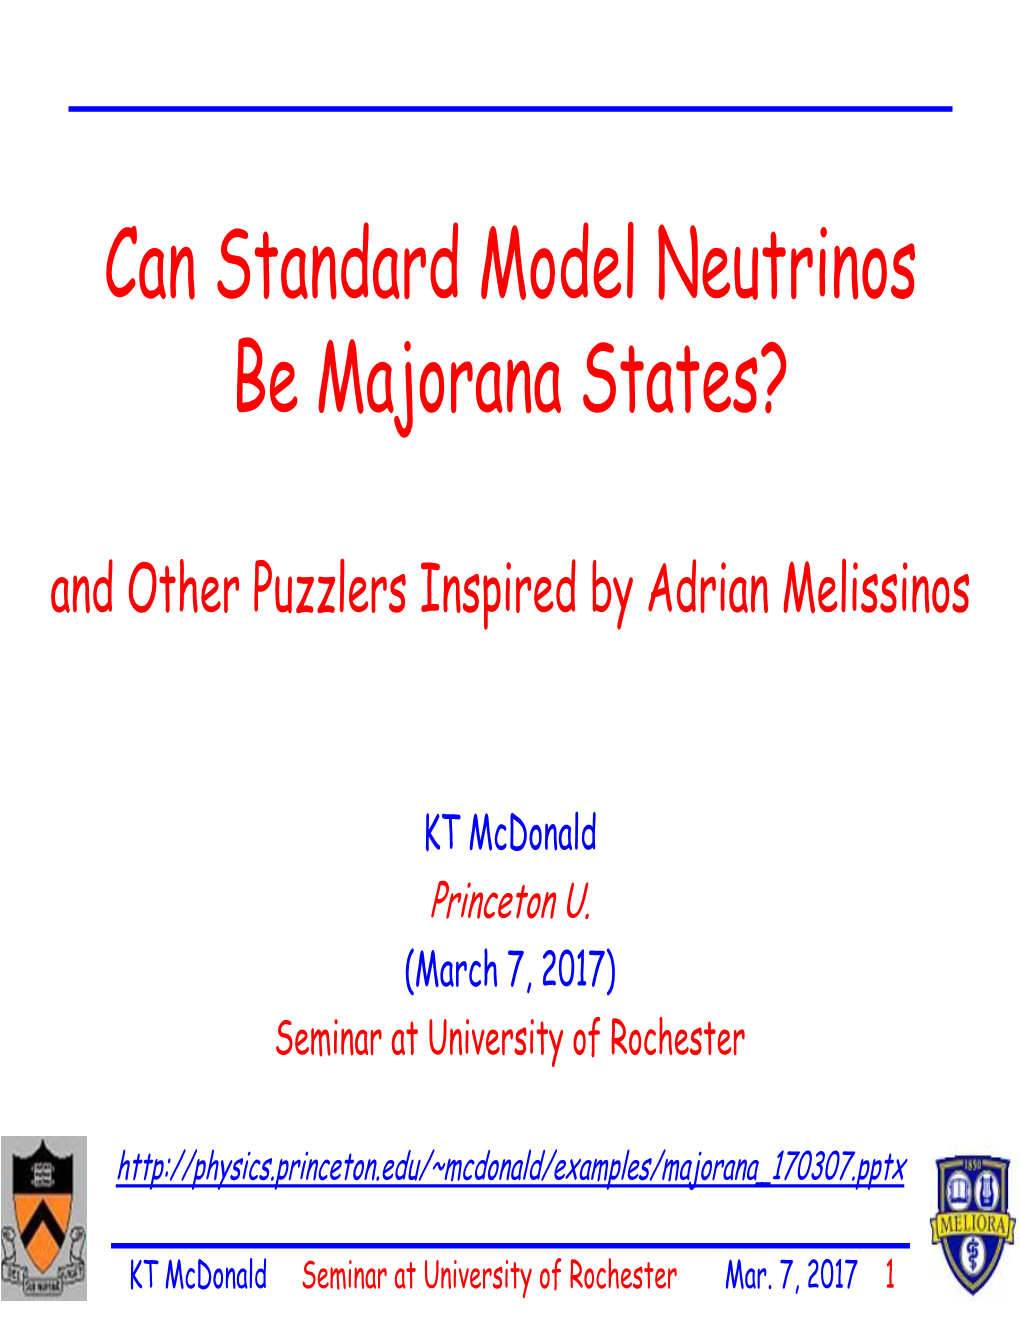 Can Standard Model Neutrinos Be Majorana States? and Other Puzzlers Inspired by Adrian Melissinos